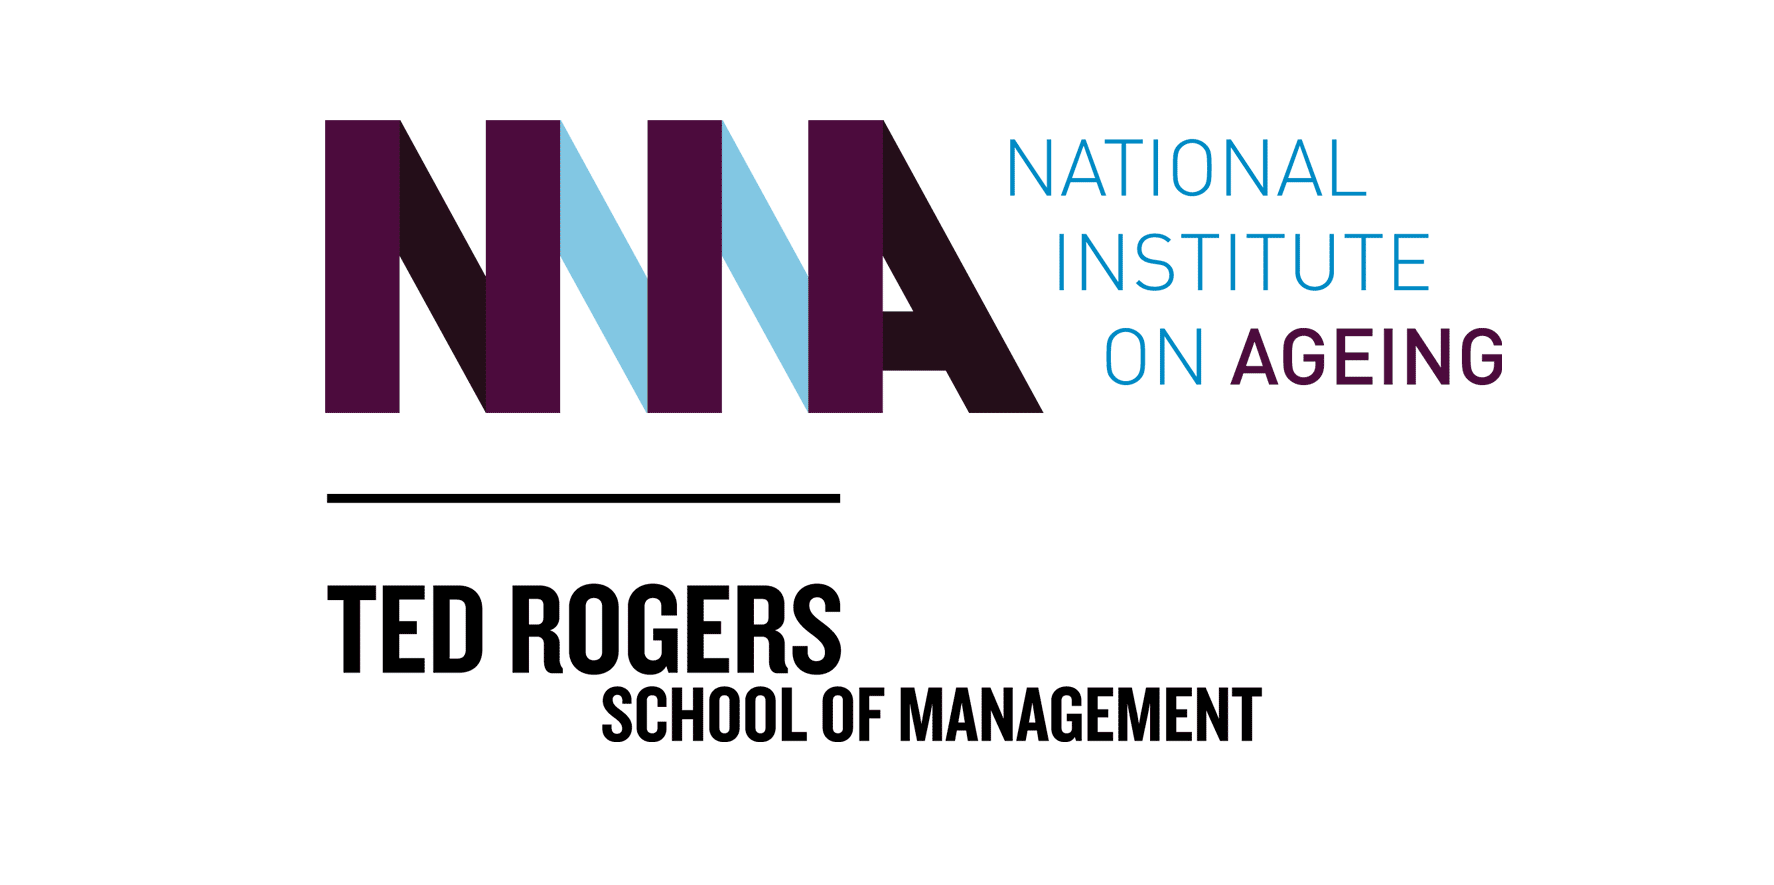 Ted Rogers School of Management NIA National Institute on Ageing